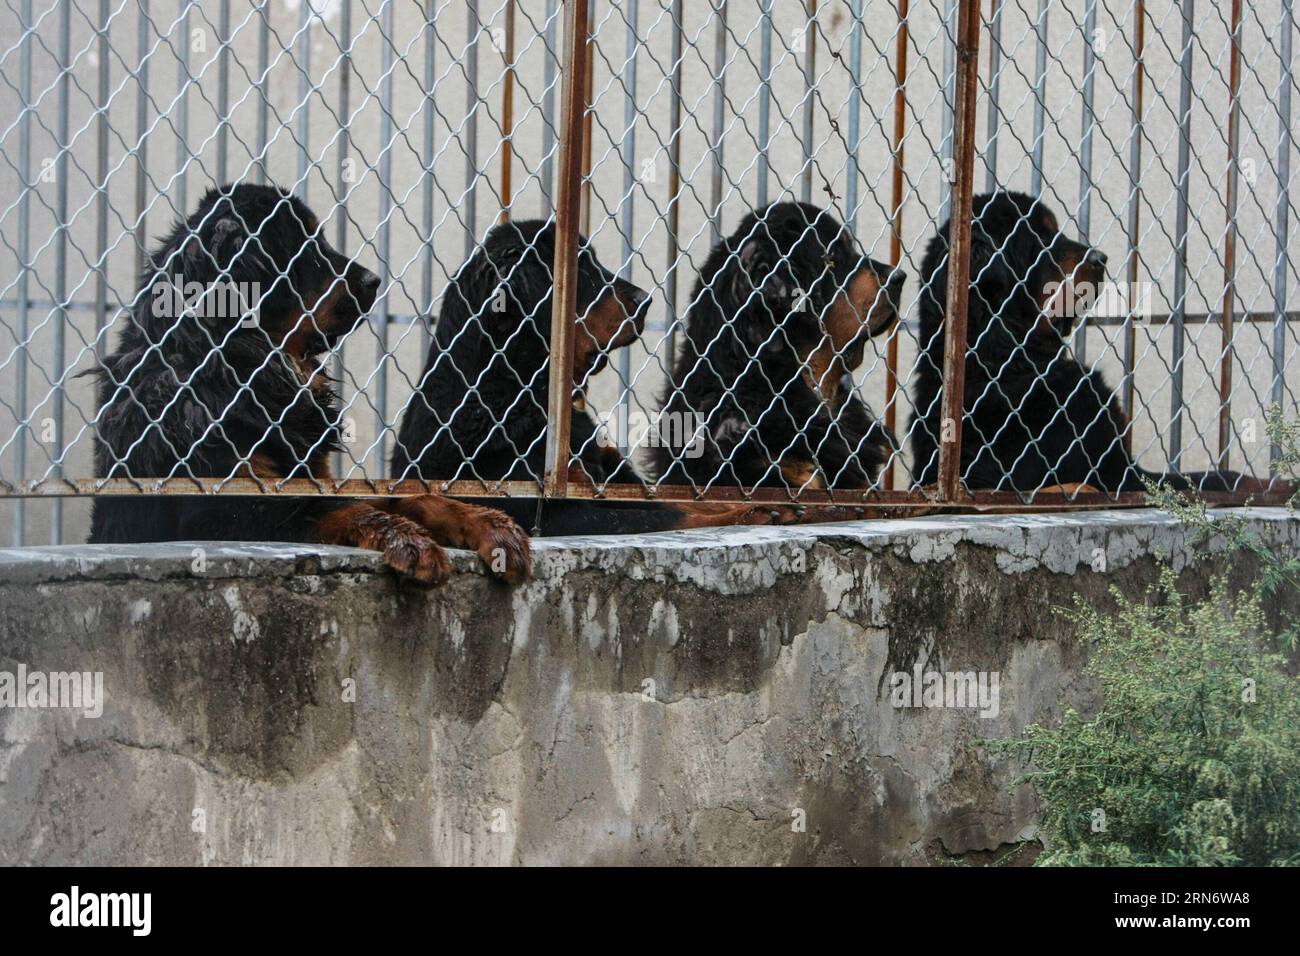 LHASA, Aug. 6, 2015 -- Tibetan mastiffs are seen at a breeding center in Lhasa, capital of southwest China s Tibet Autonomous Region, Aug. 6, 2015. The Tibetan Mastiff is a world famous and typical guardian dog species of Tibet. In recent years, due to market disorder and cross breeding, the price of Tibetan mastiffs fell sharply. However, with the aim to maintain the pure blood of the creature, a breeding center was jointly established with local farming science departments in Lhasa in 2015. So far, 15 pure-blood heritage Tibetan mastiffs were raised at the breeding center. )(wyo) CHINA-TIBET Stock Photo